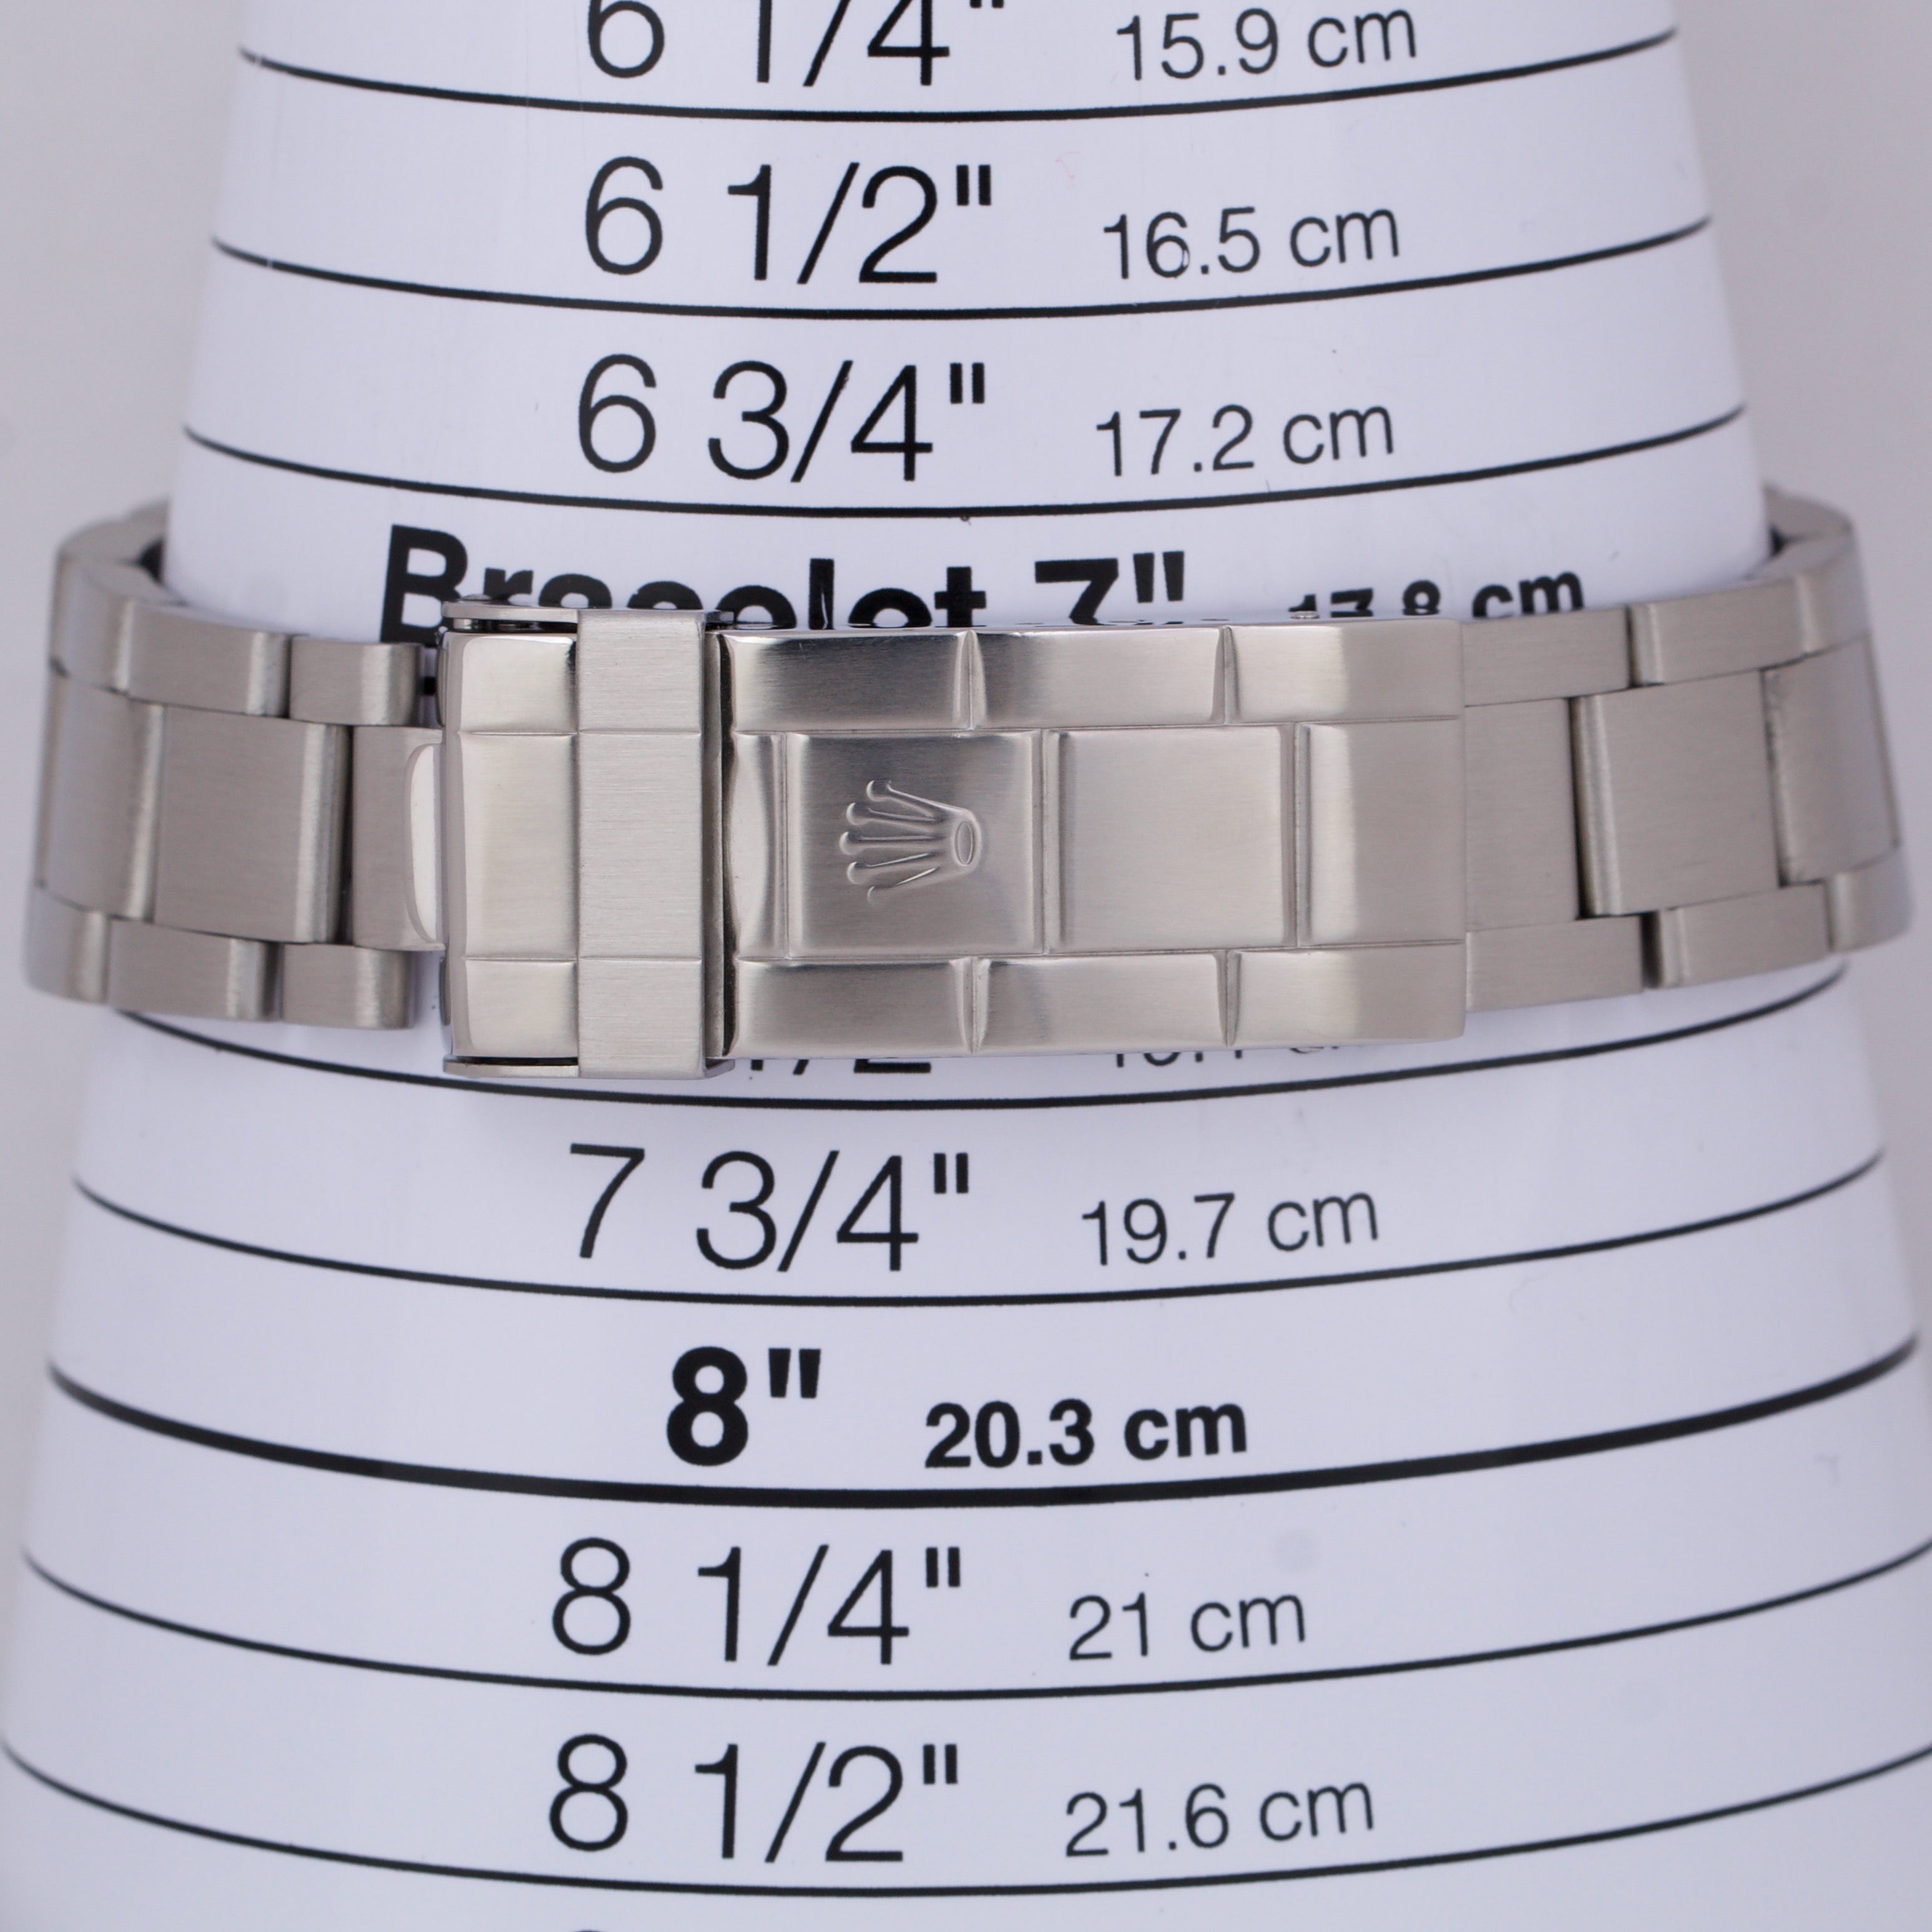 How to adjust the size of a Rolex jubilee Band - YouTube